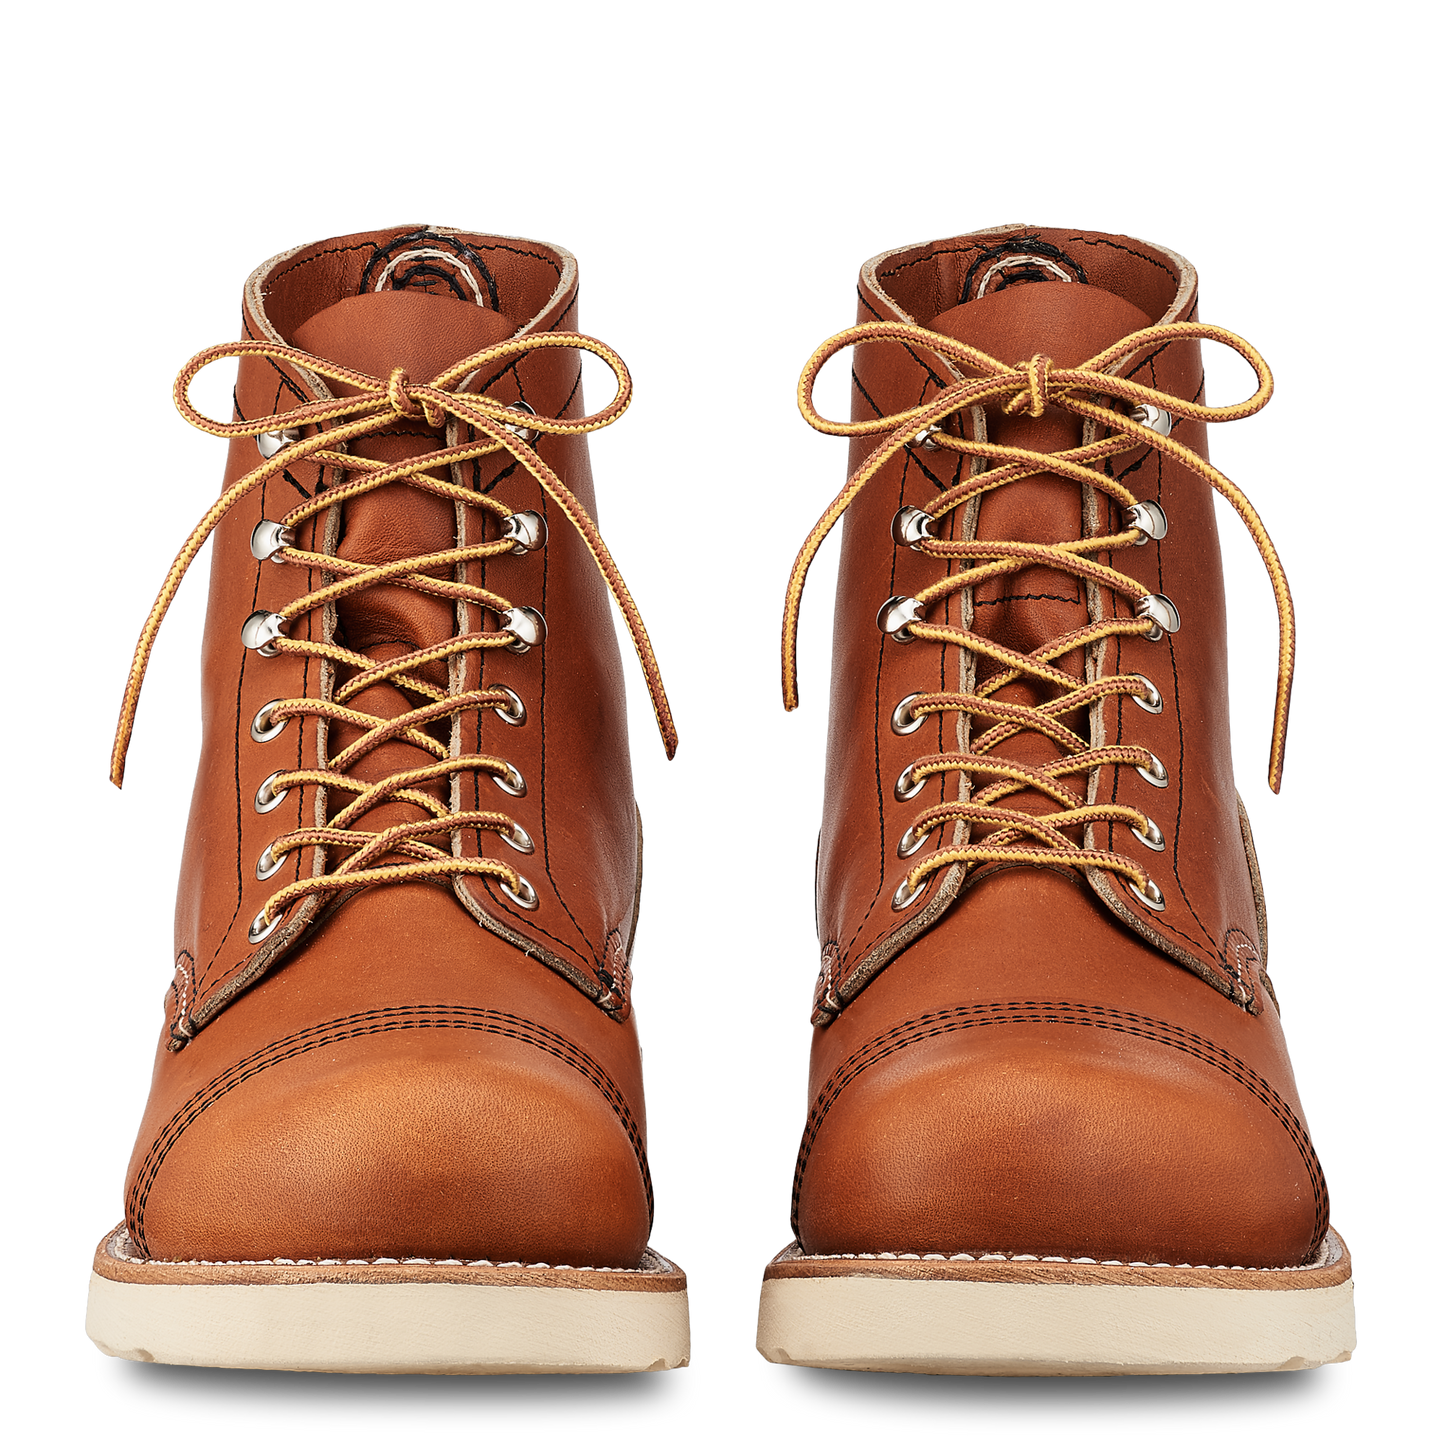 Red Wing 8089 Iron Ranger Boot